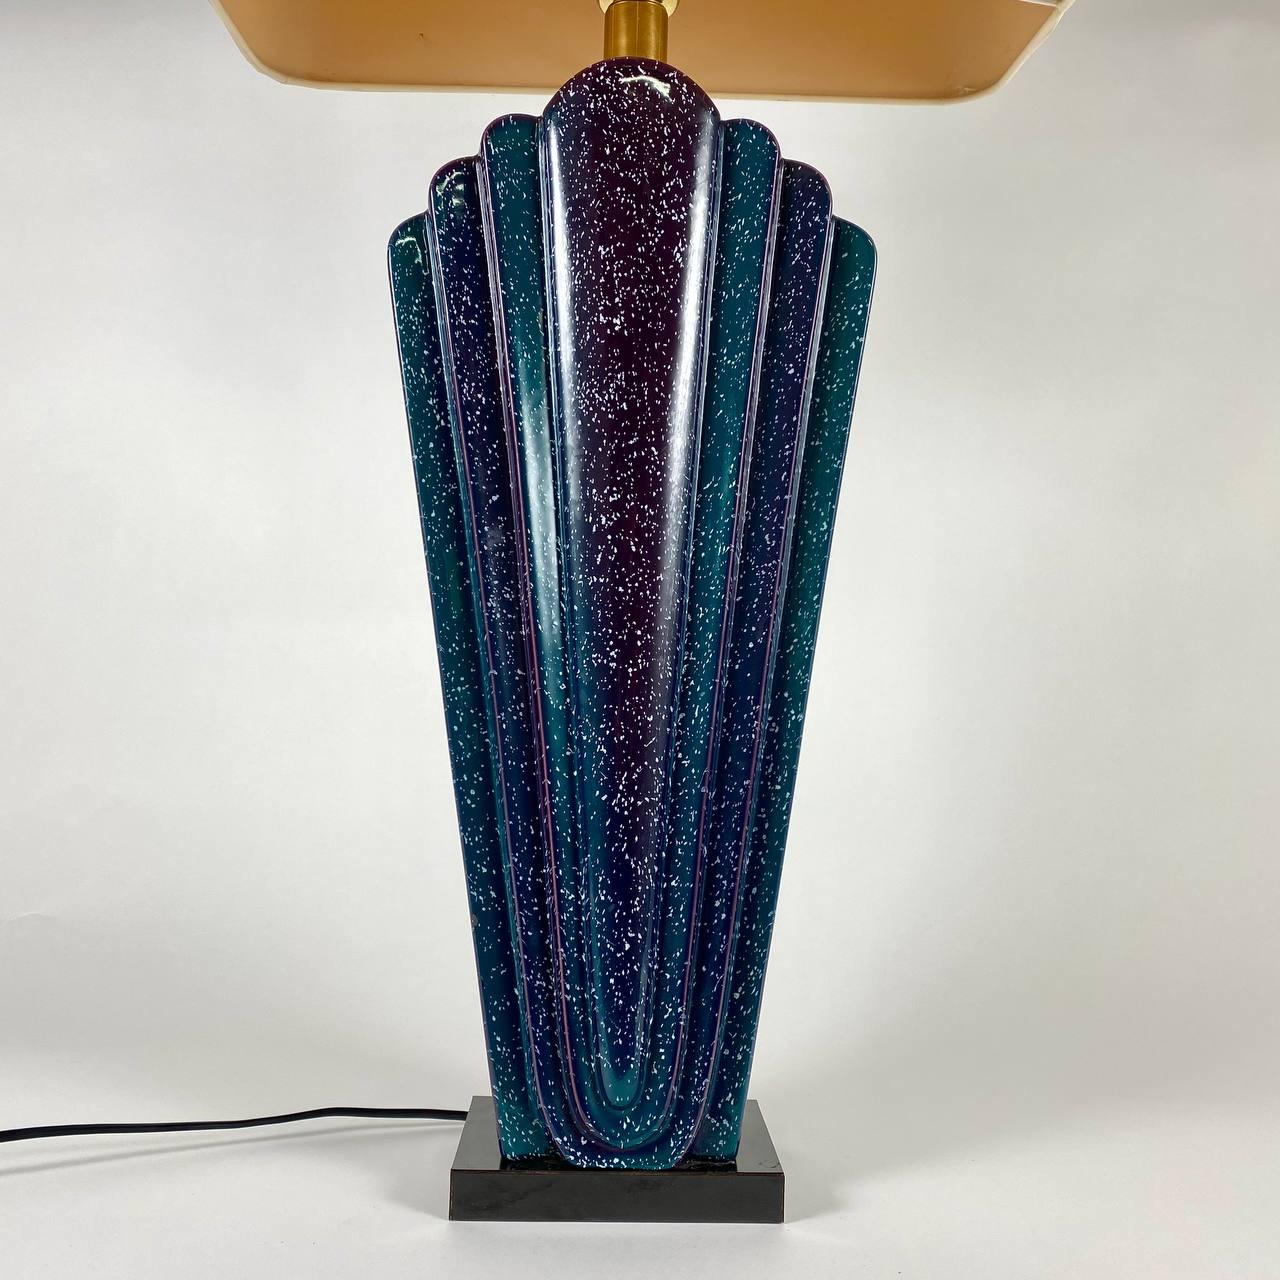 Large vintage table lamp from the Italian manufacturer showcases minimalist forms and a well-defined silhouette. 

It is mounted on a black pedestal. The base is made of Murano glass in rich shades of aquamarine, violet and blue which will add a